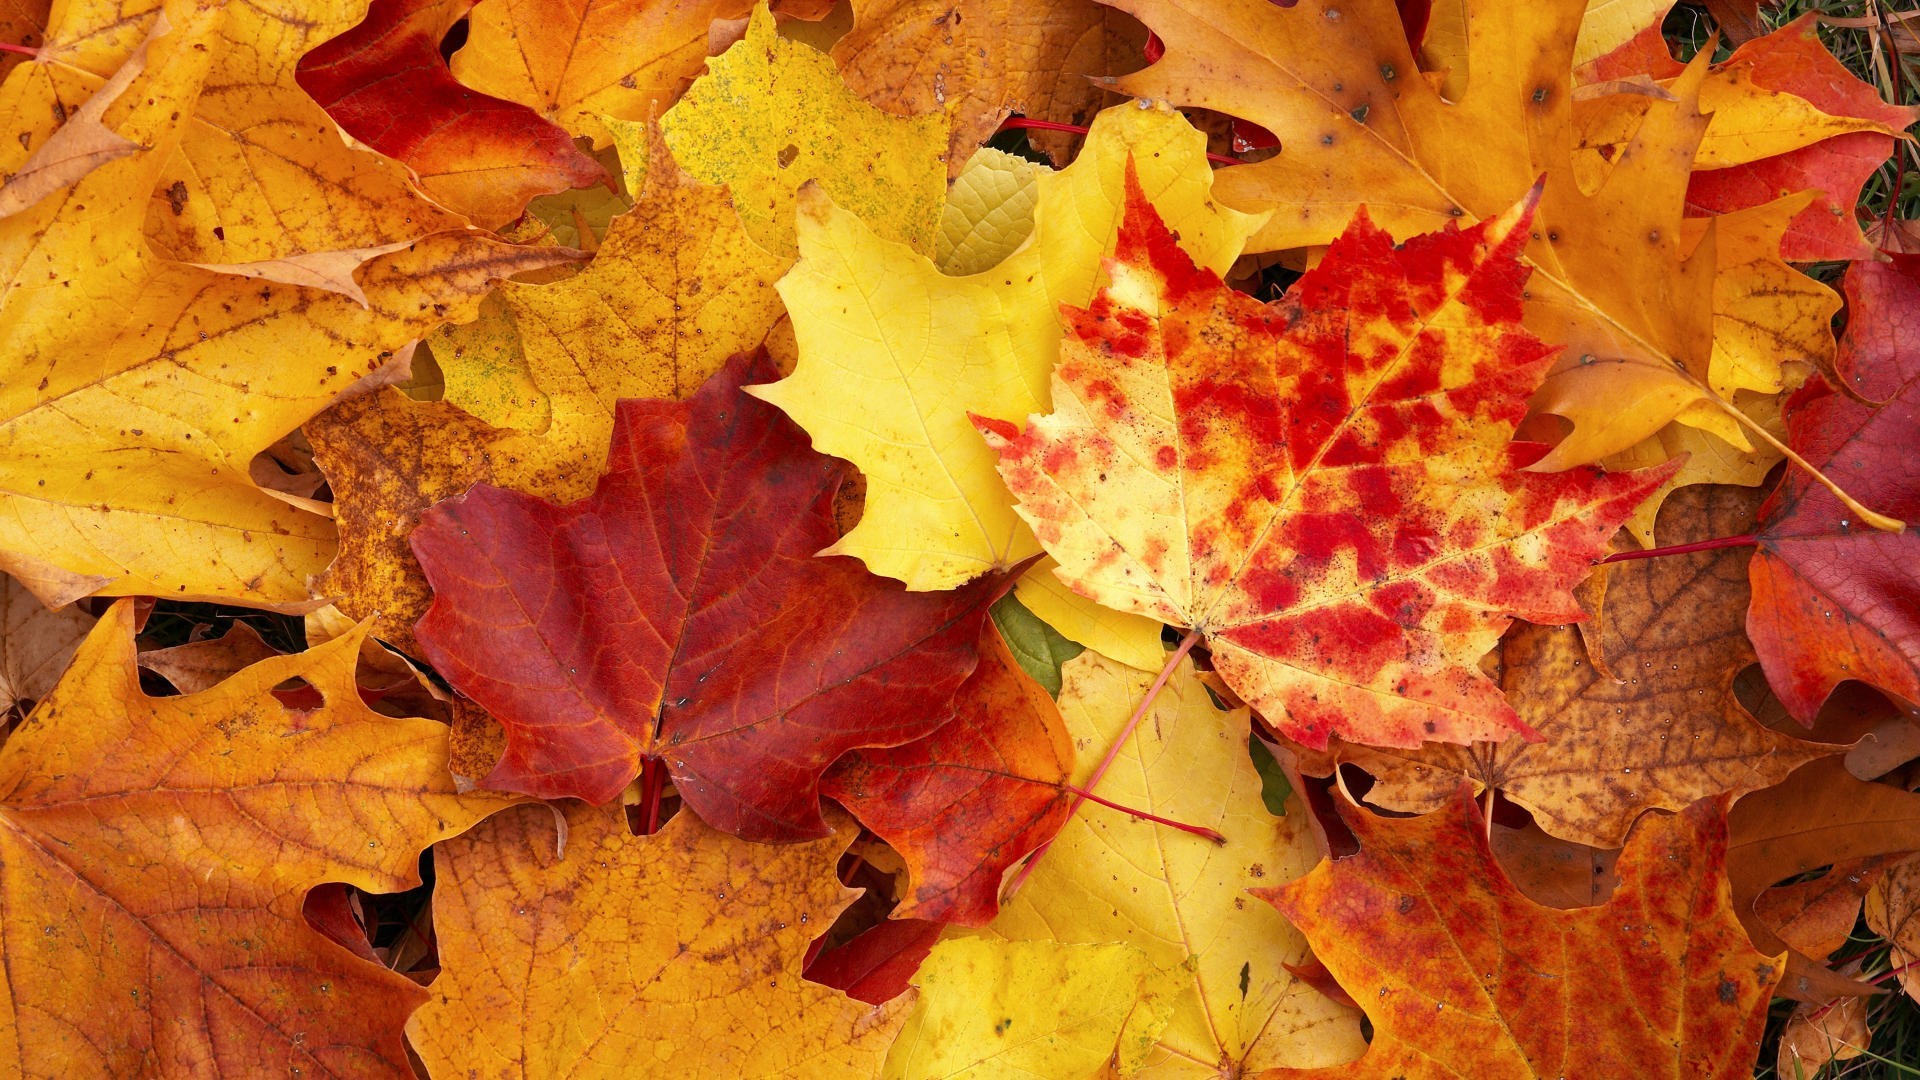 1920x1080 Fall Picture. Fall Backgrounds. Fall Wallpaper. Fall Wallpaper Free. Fall  Leaves Wallpapers Desktop. Fall Leaves Wallpapers For Iphone.